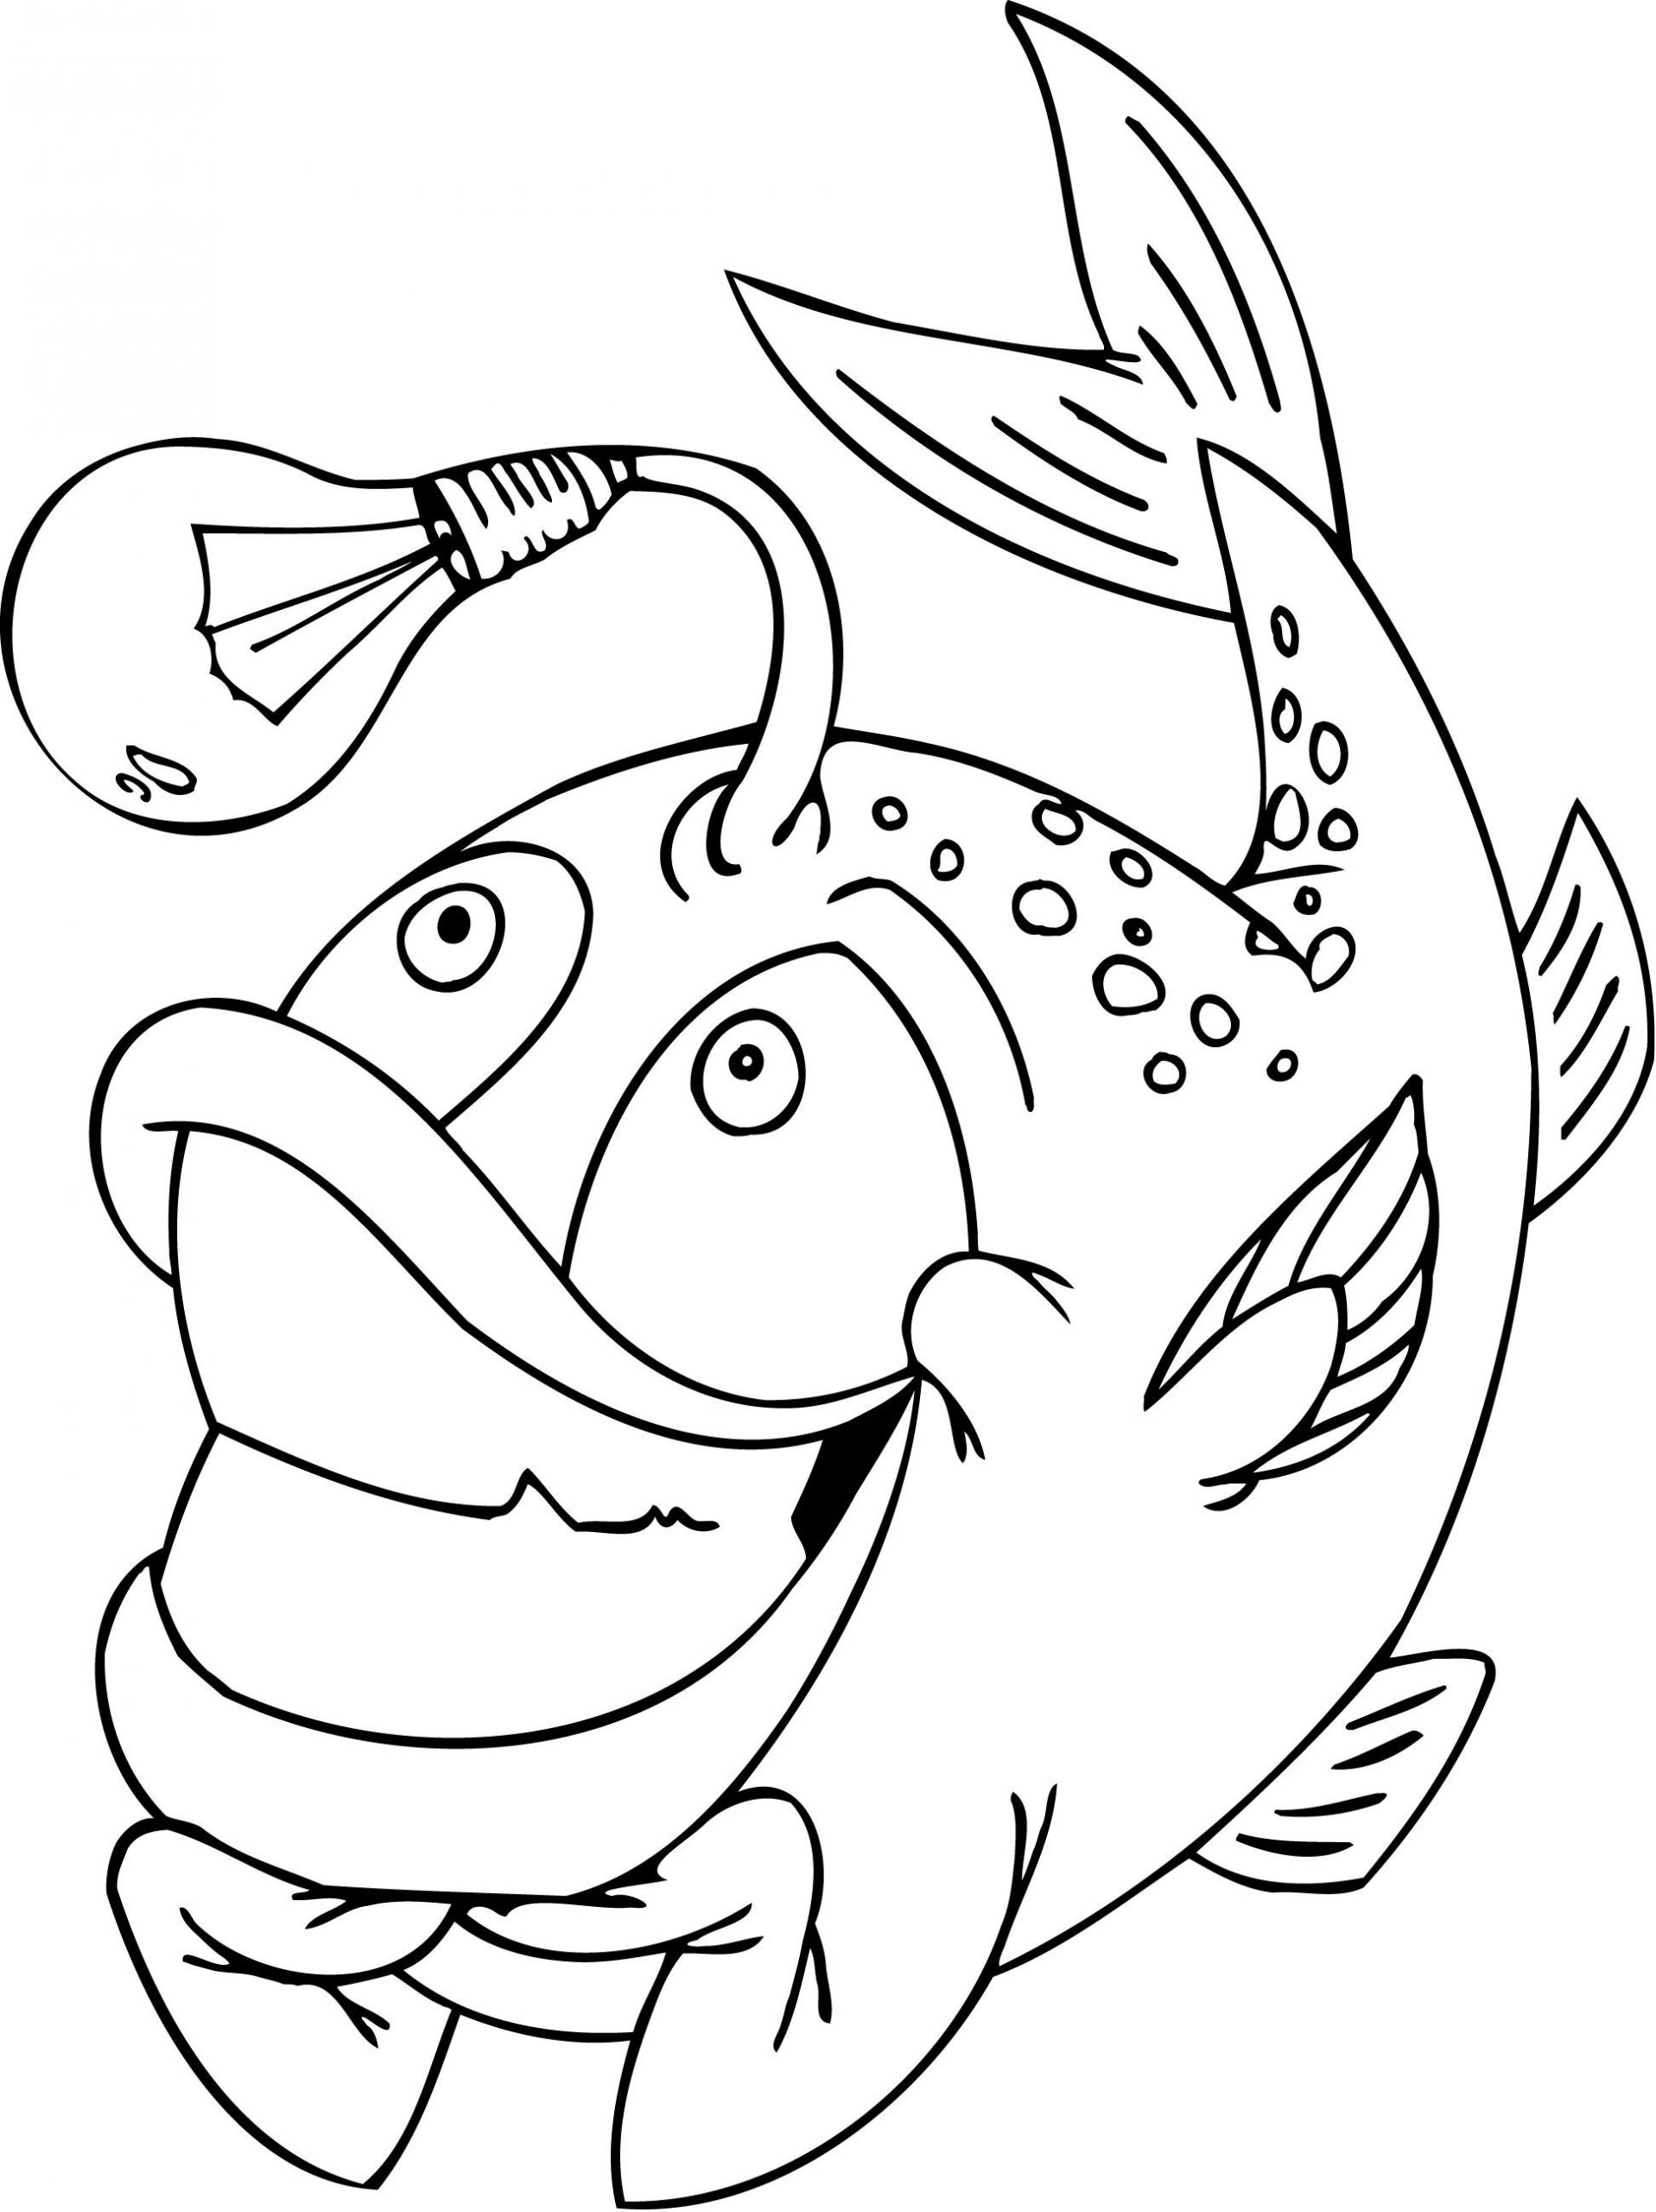 Coloring Books For Adults Funny
 Free Printable Funny Coloring Pages For Kids